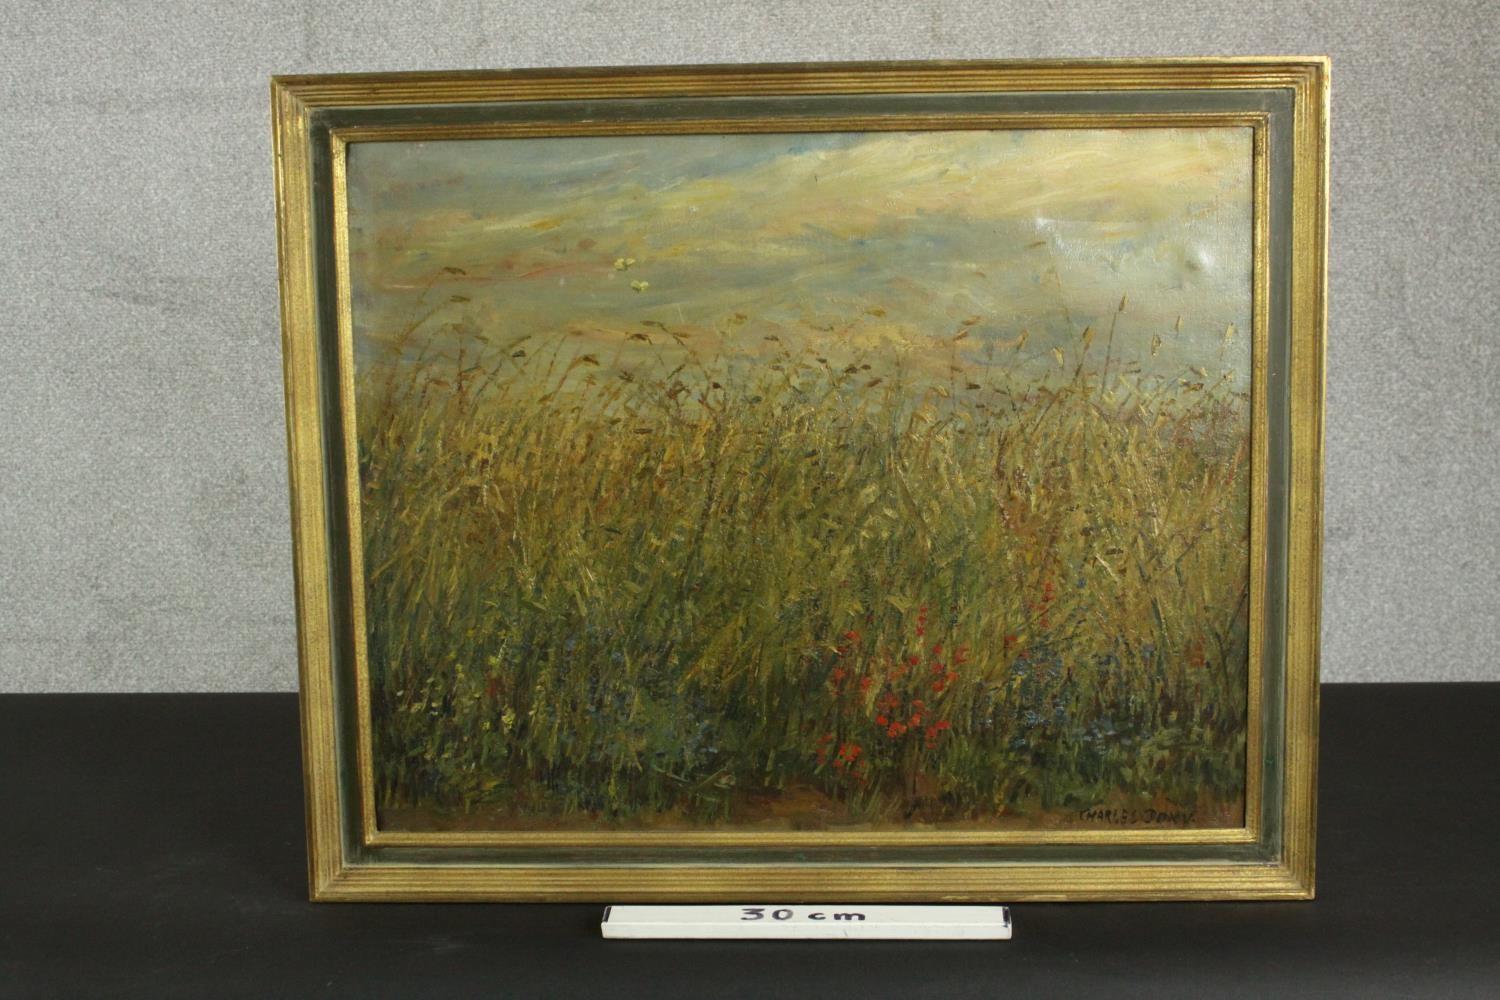 Charles Dony (20th century school), A Meadow in Profile, oil on canvas, signed lower right. H.63 W. - Image 3 of 6